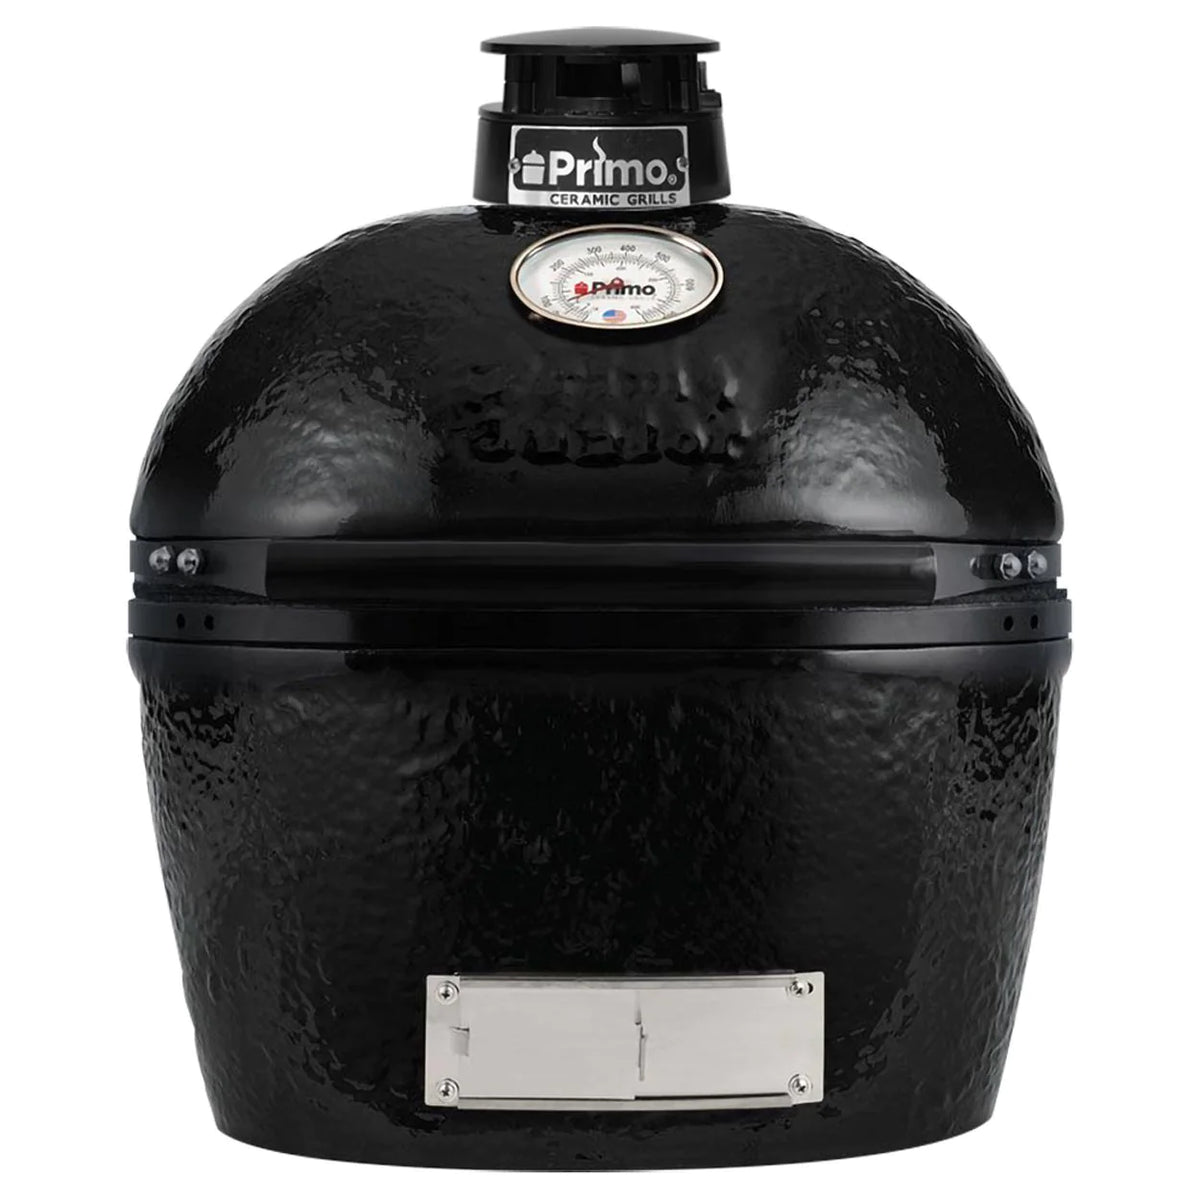 Primo Oval Junior 200 21 Inch Ceramic Kamado Charcoal Grill Front View